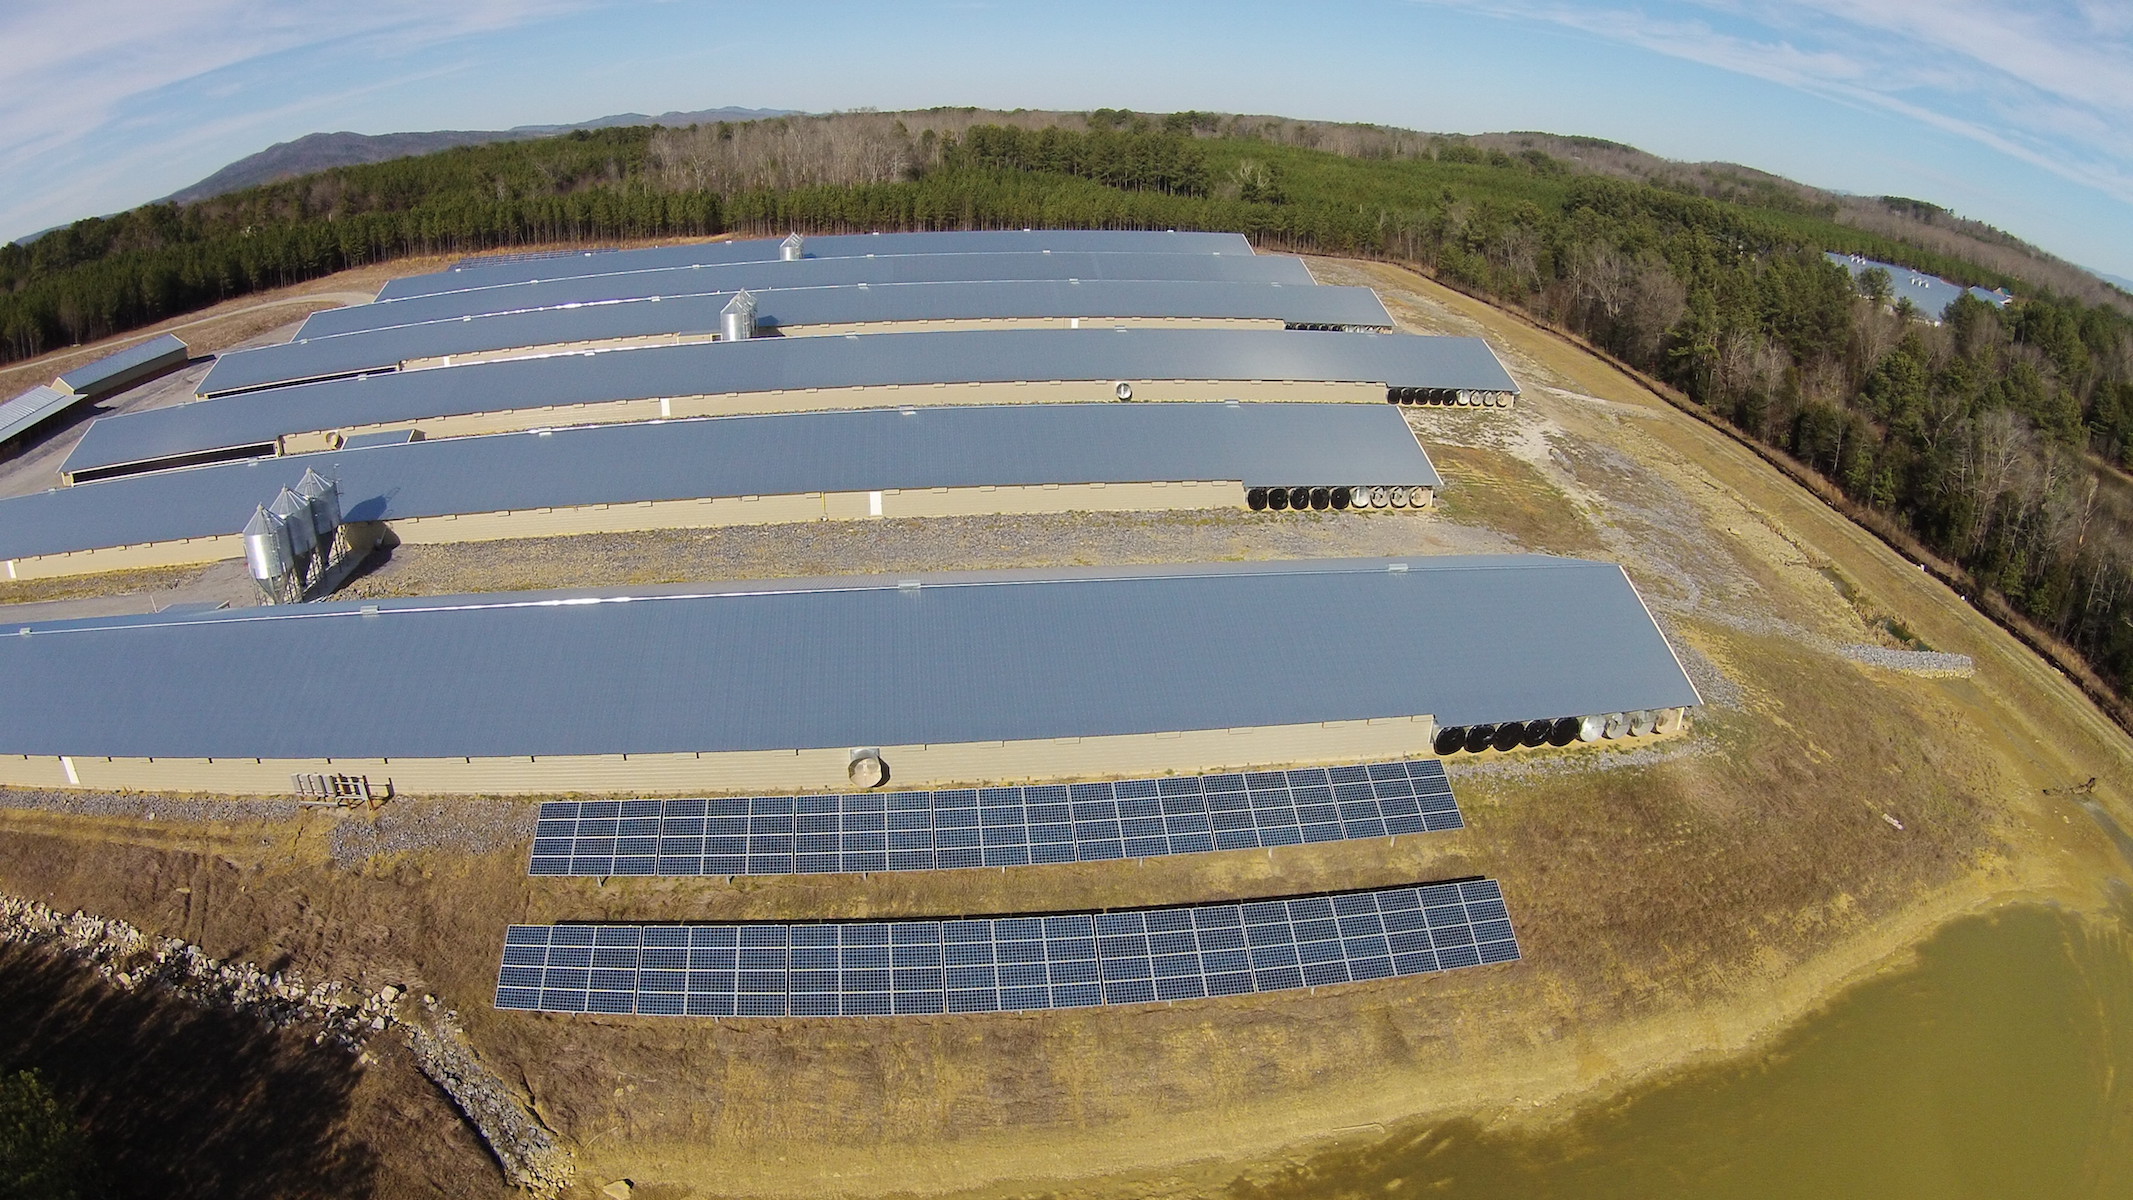 Renewvia Energy completed multiple solar projects totaling 200kW of installed solar photovoltaic power for Baxter Brothers Poultry Farm in Georgia.